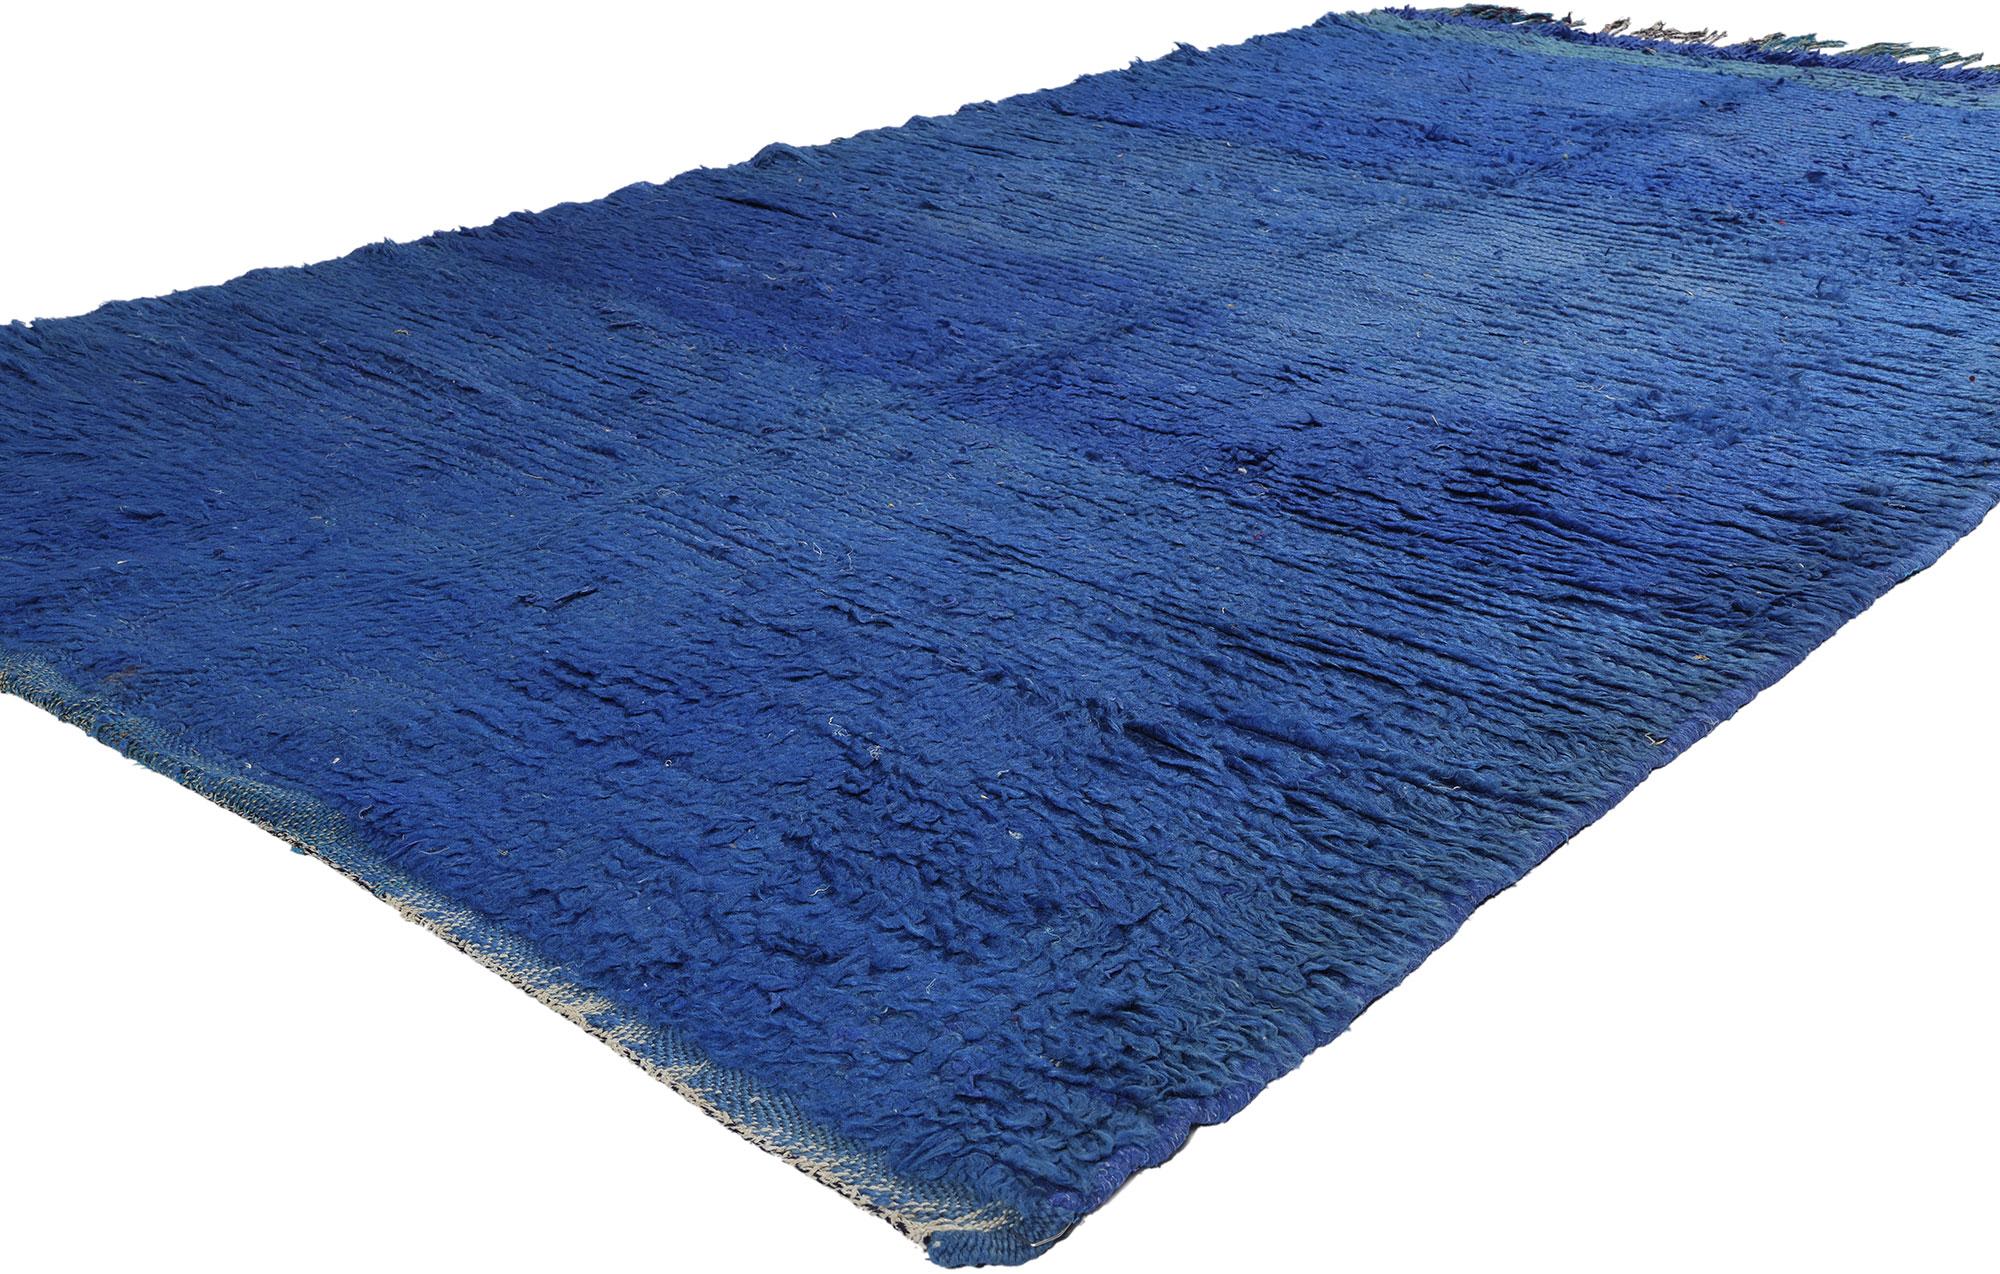 21773 Vintage Blue Beni Mrirt Moroccan Rug, 04'09 x 08'05. Beni Mrirt rugs represent the esteemed tradition of Moroccan weaving, known for their luxurious texture, geometric patterns, and serene earthy tones. Crafted by skilled artisans of the Beni